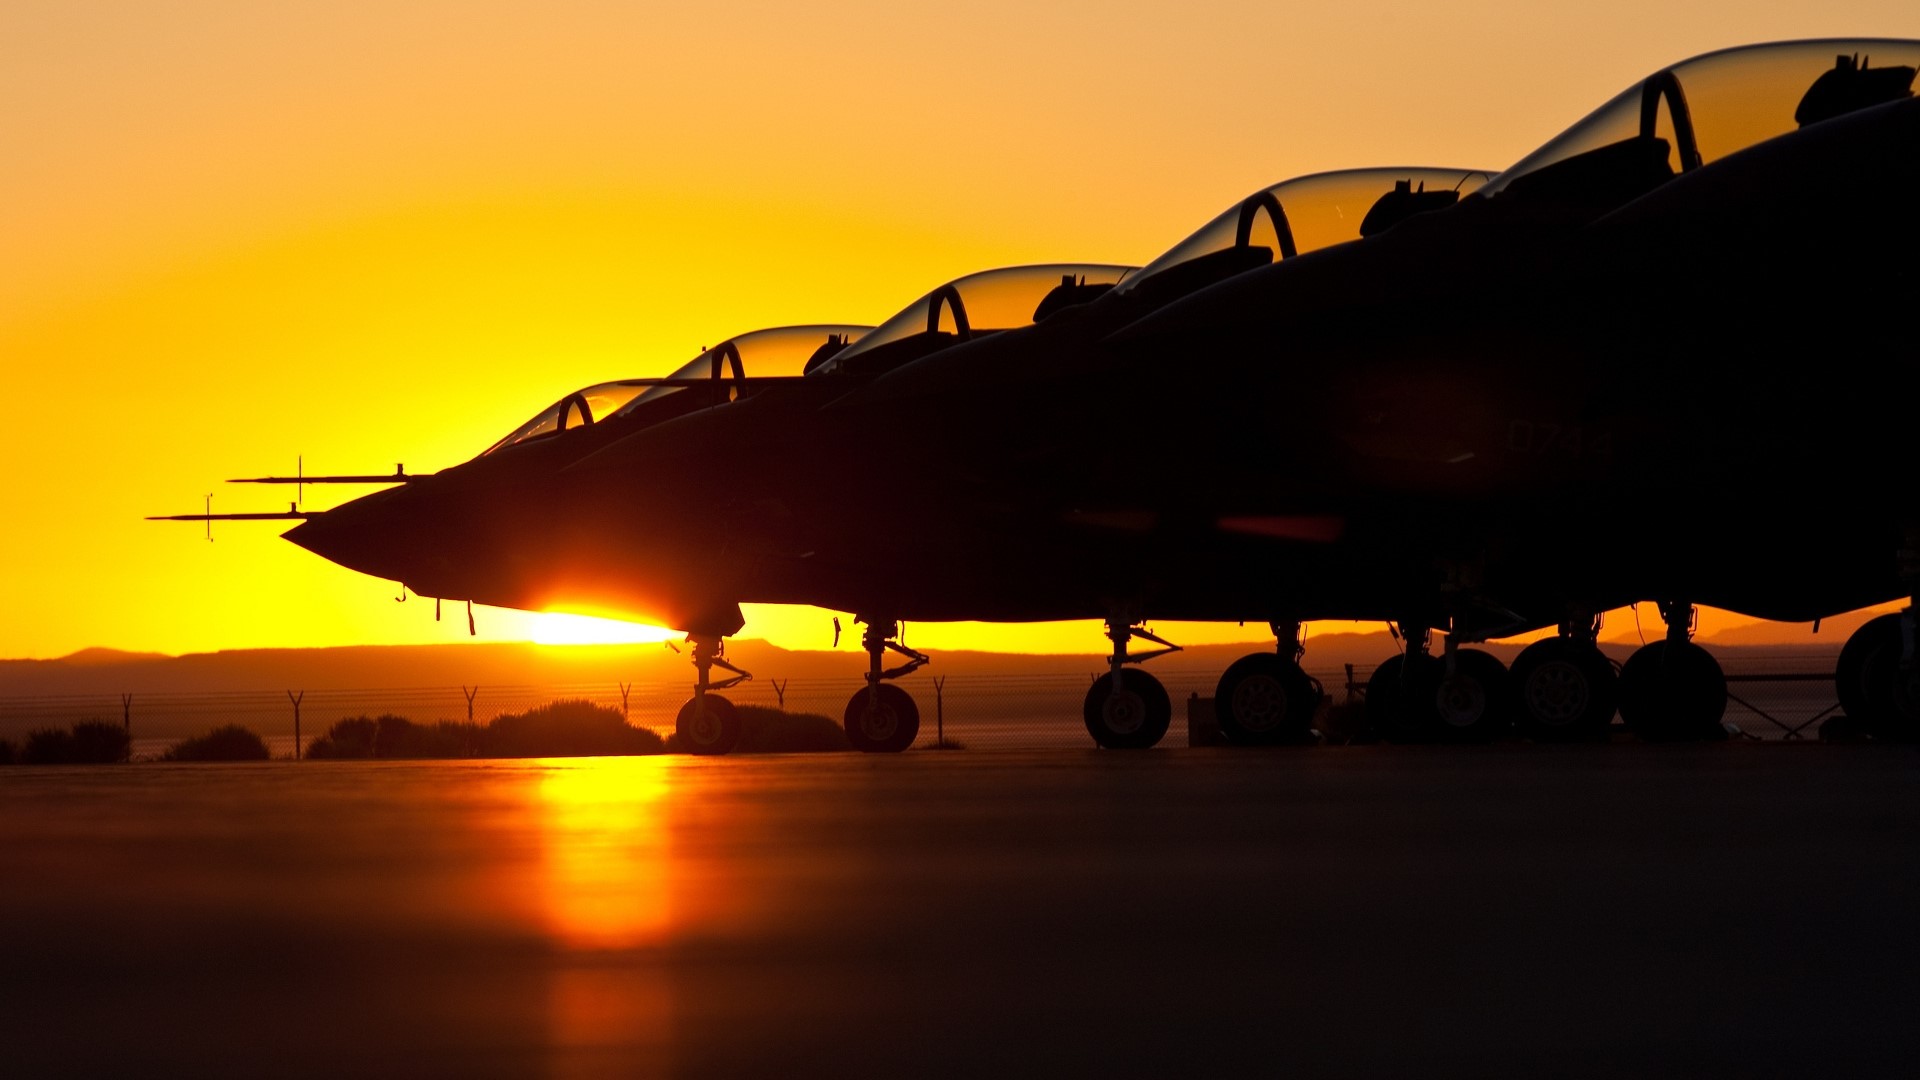 Hd fighter jets at sunset